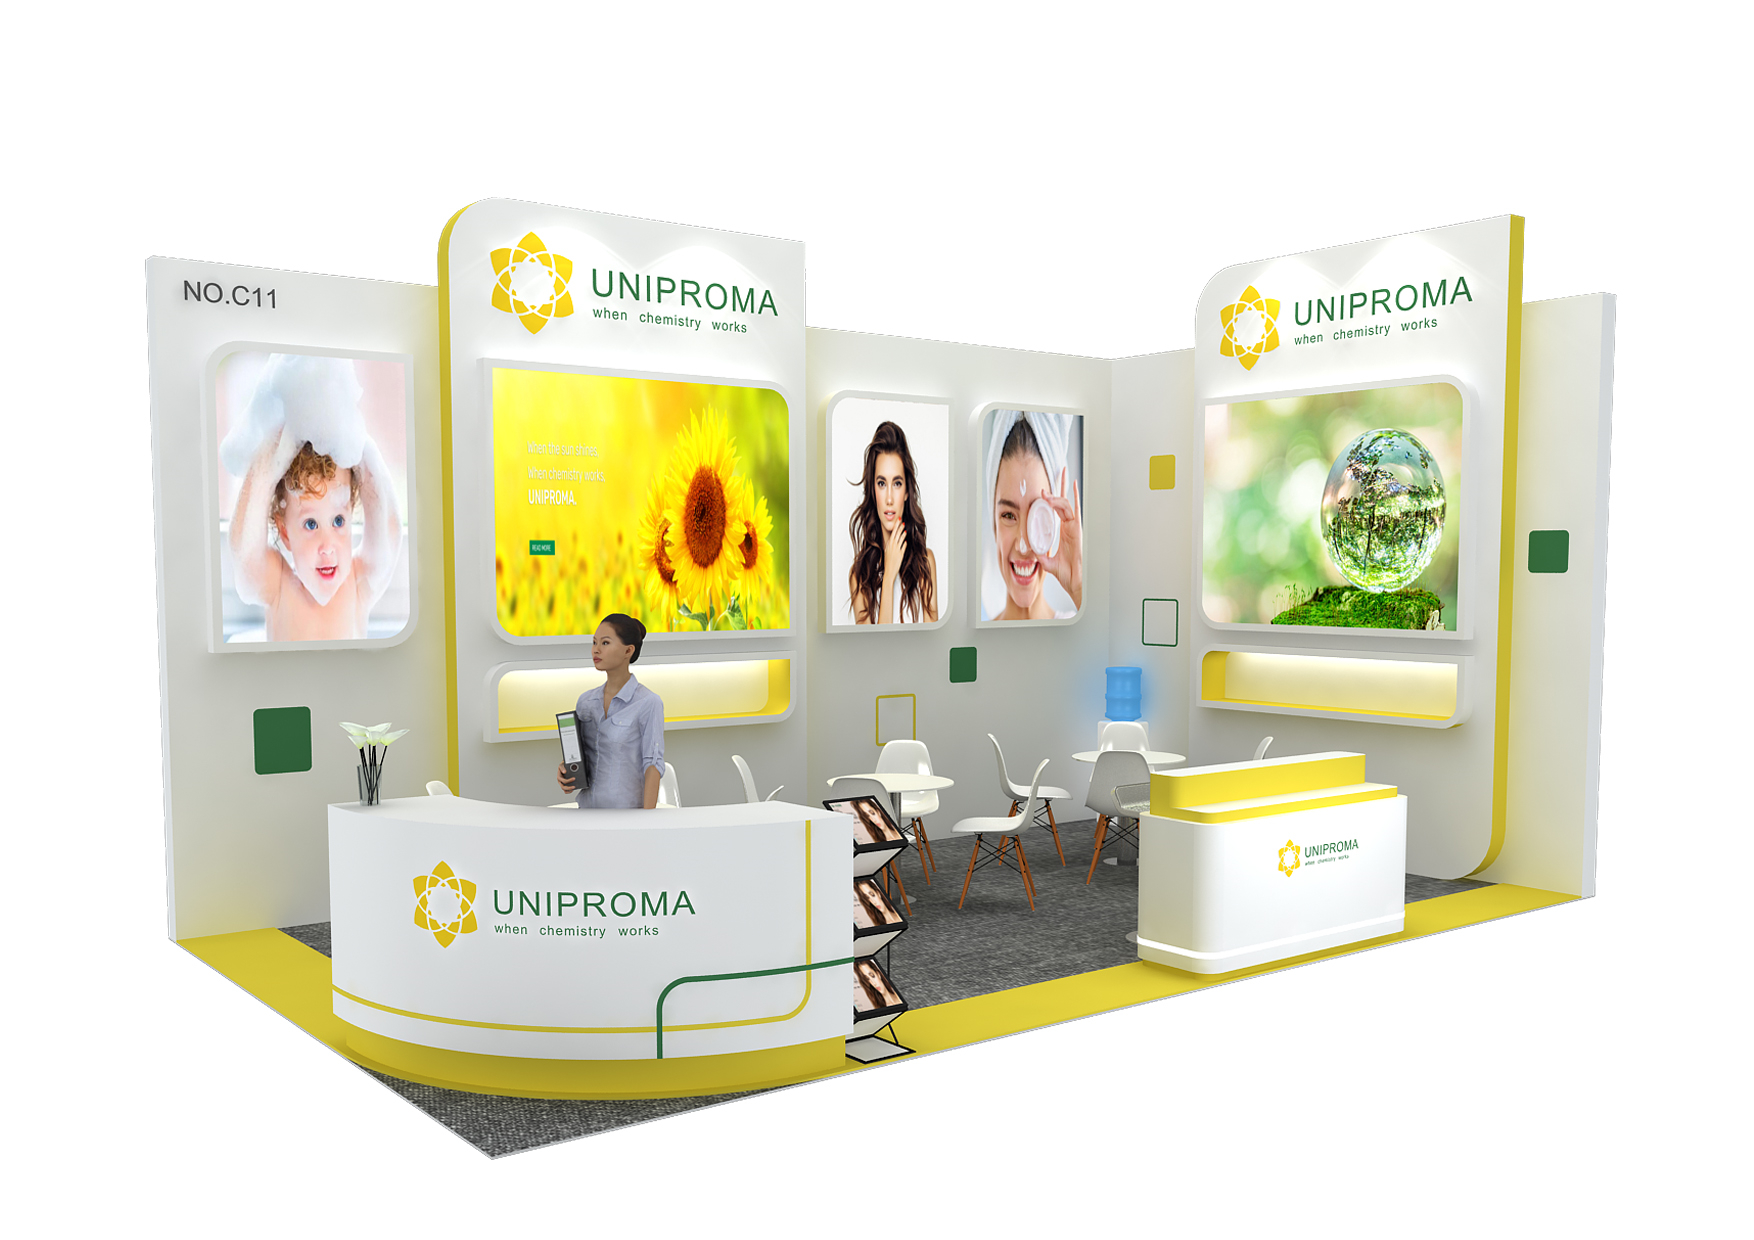 Meeting us in Barcelona, at Booth C11